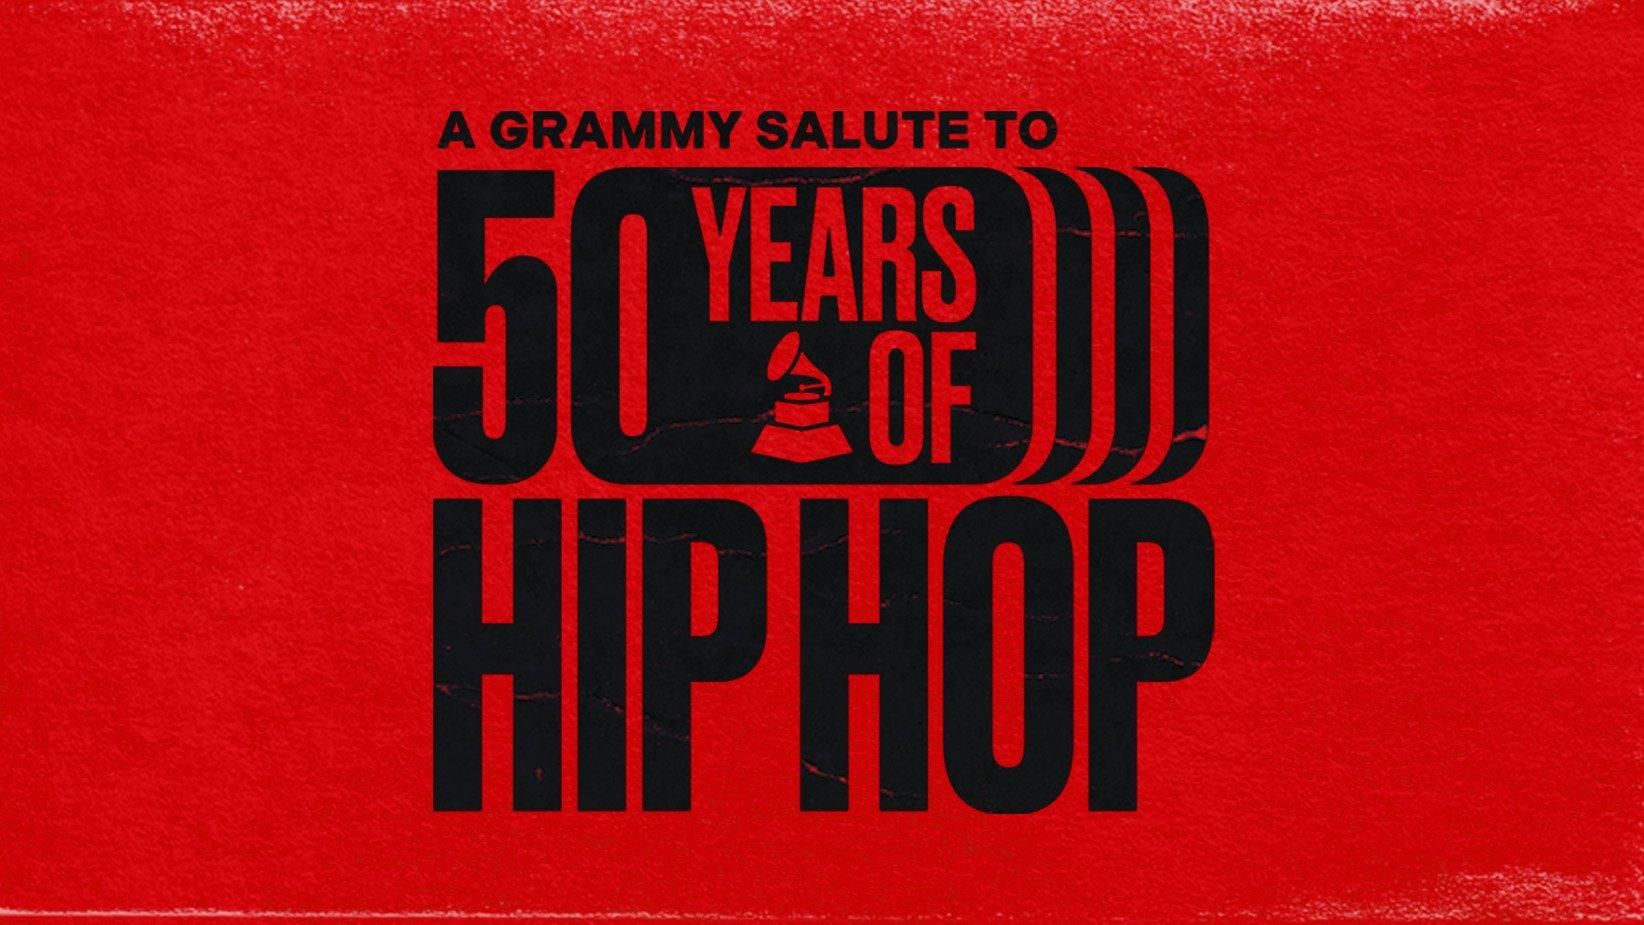 Jermaine Dupri Reflects On The Global Impact Of HipHop At "A GRAMMY